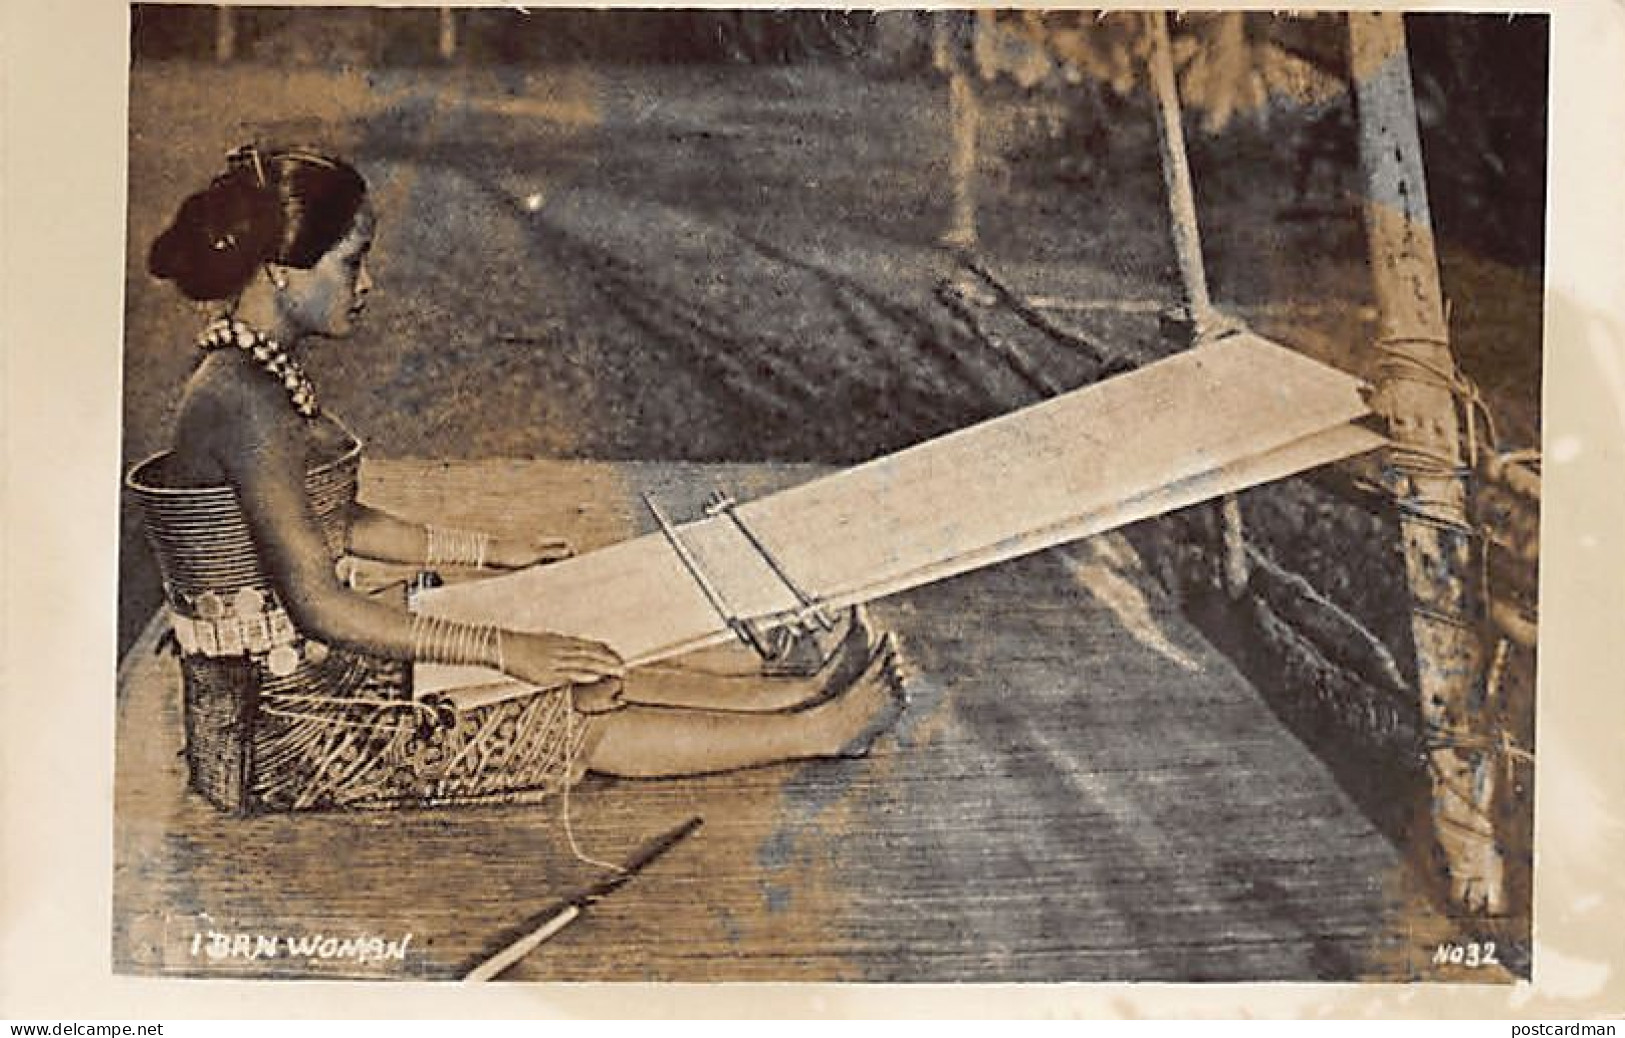 Malaysia - Iban Woman Weaving - REAL PHOTO - Publ. Unknown 32 - Malasia